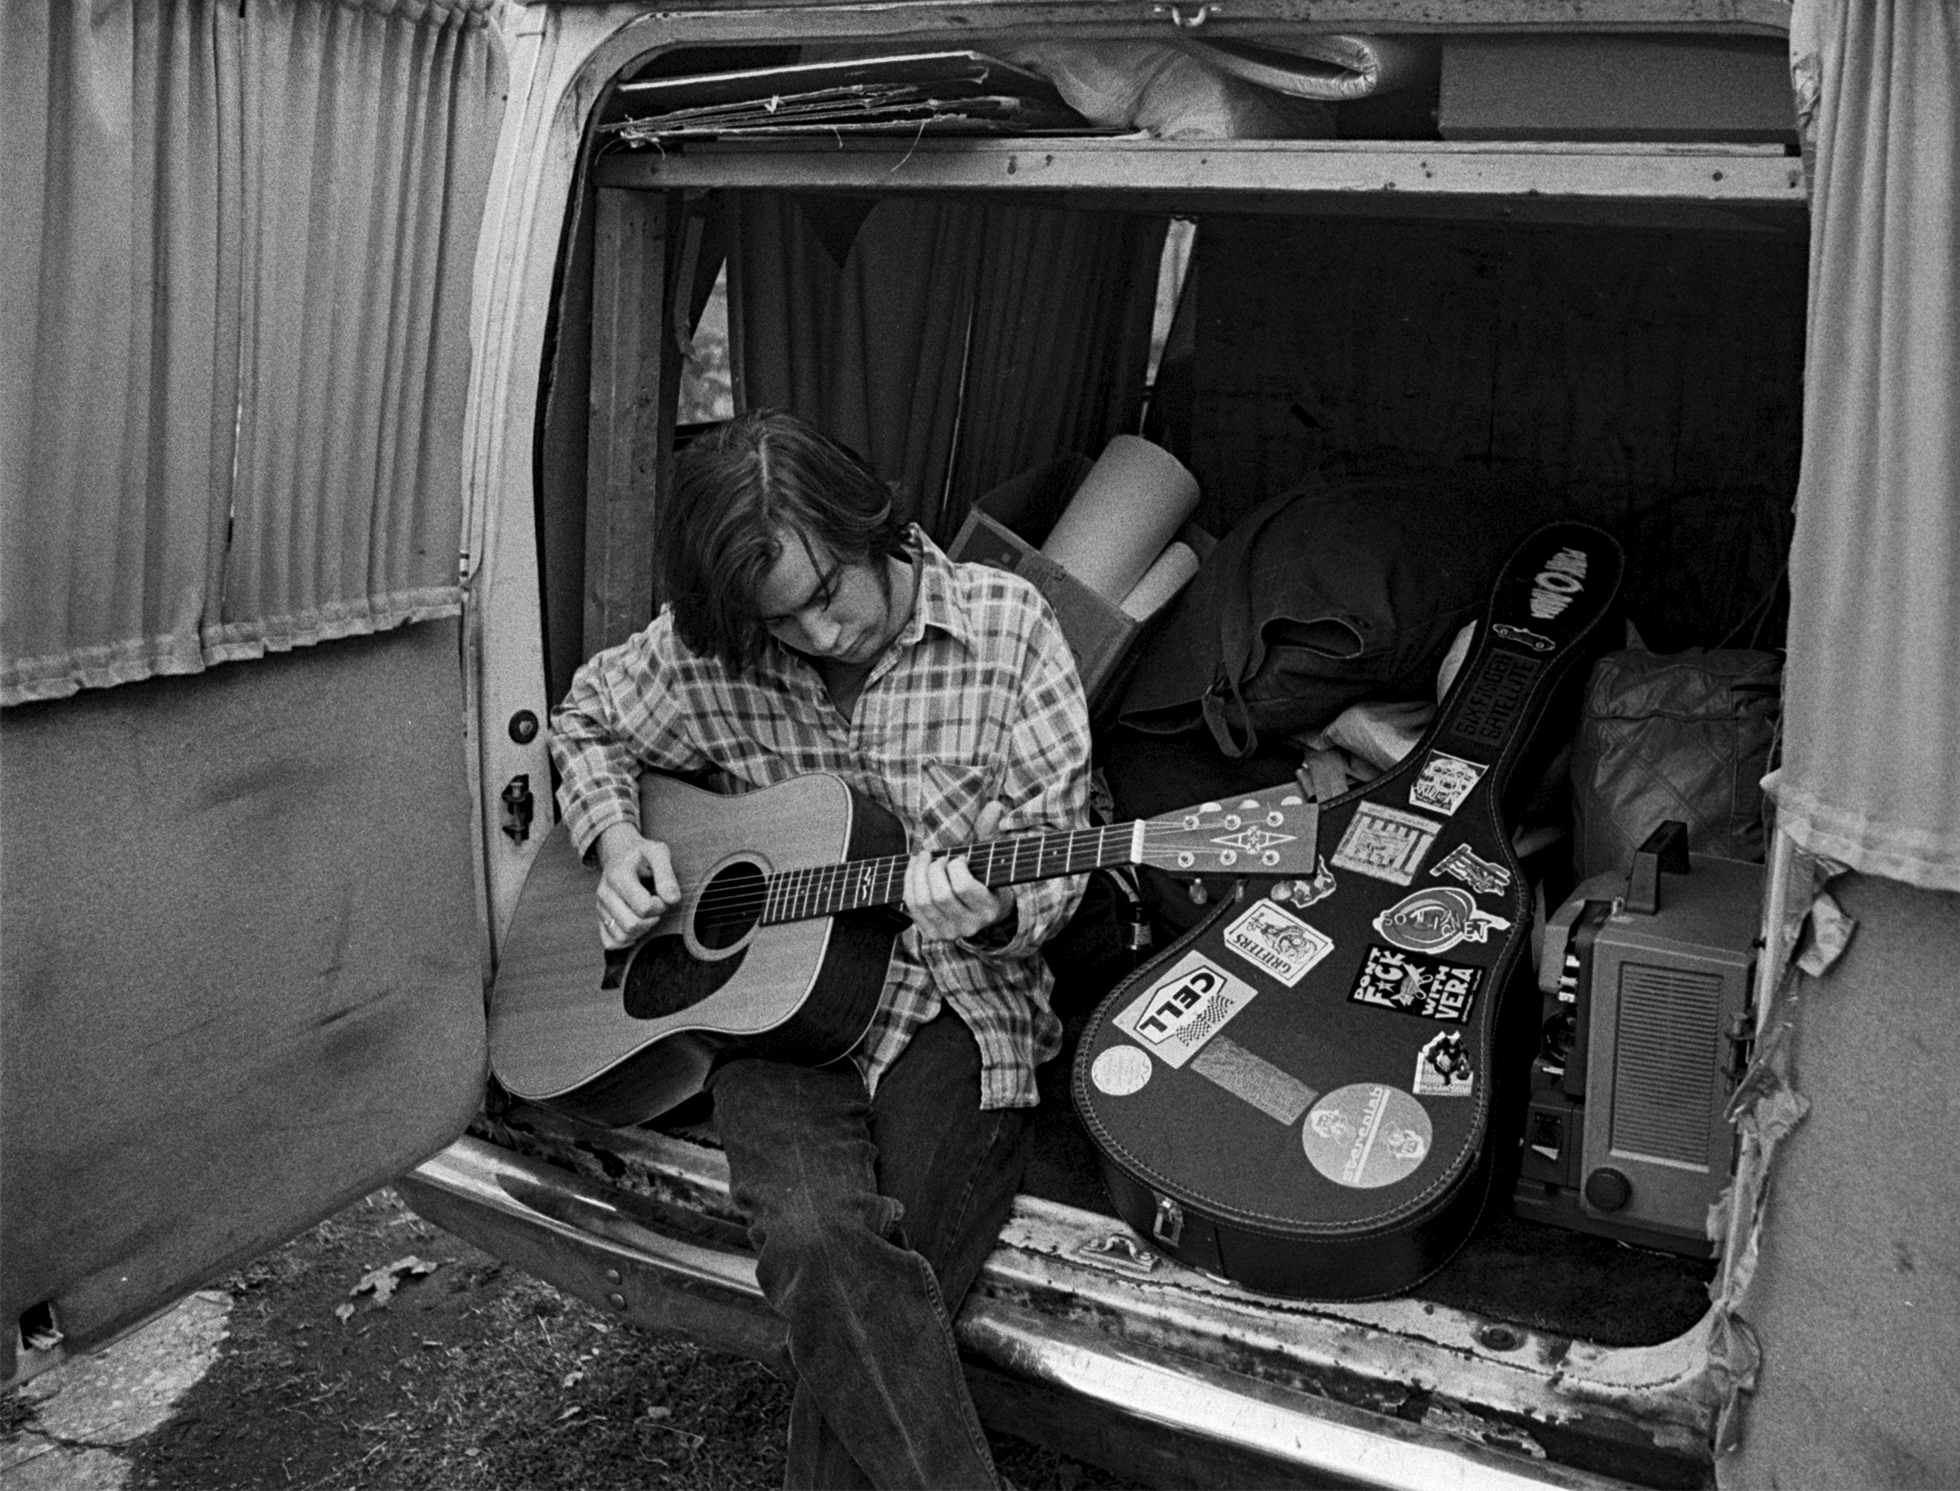 Chris O’Rourke of Sleepyhead warms up for a show in the mid-1990s.